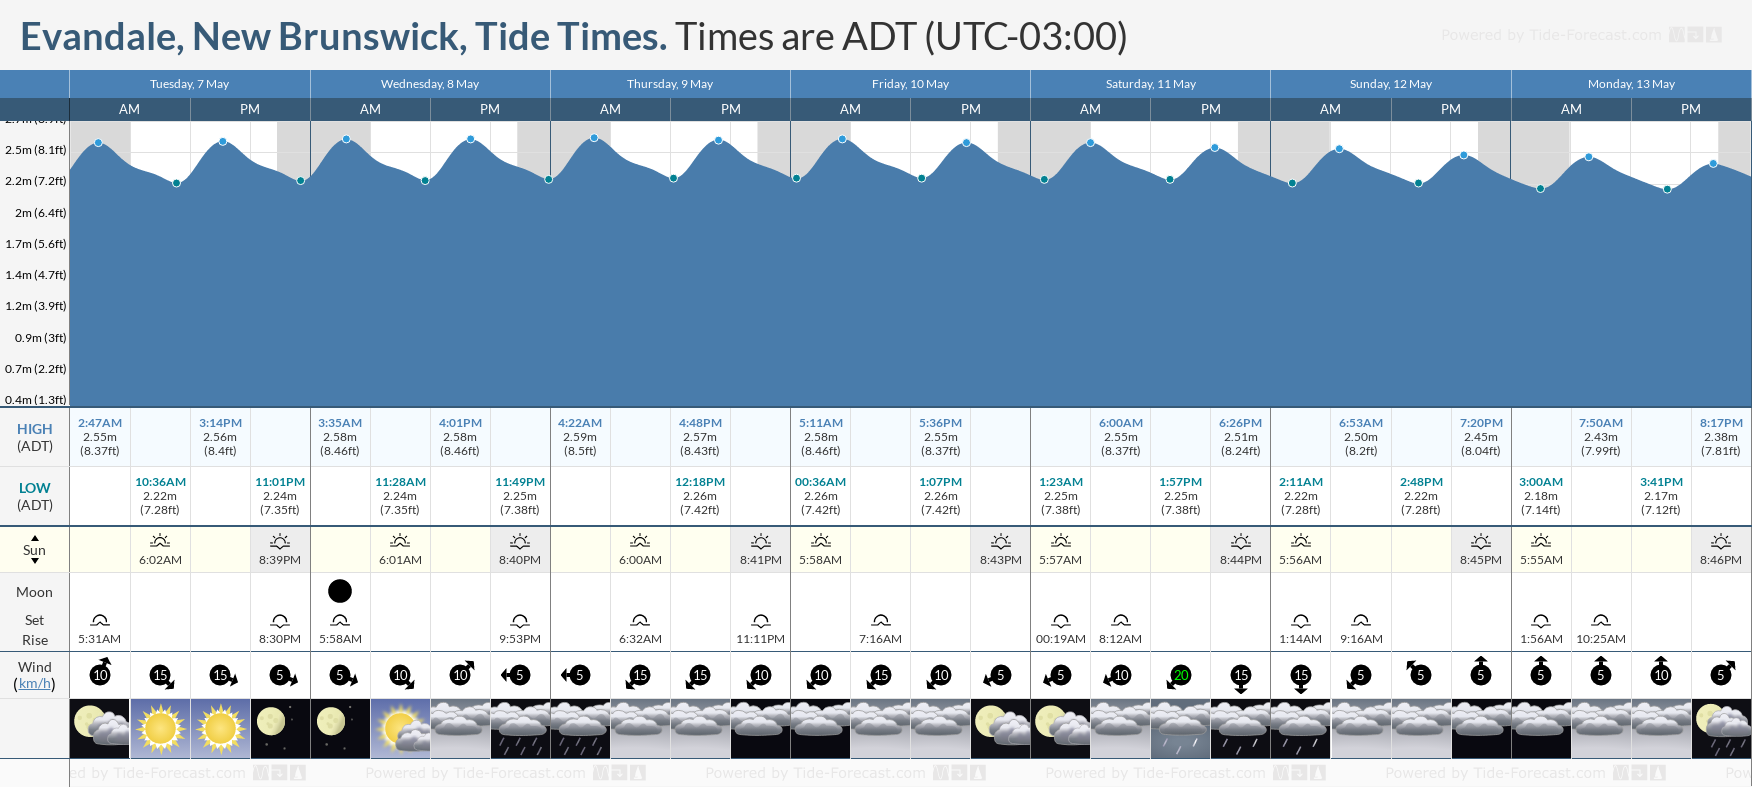 Evandale, New Brunswick Tide Chart including high and low tide tide times for the next 7 days